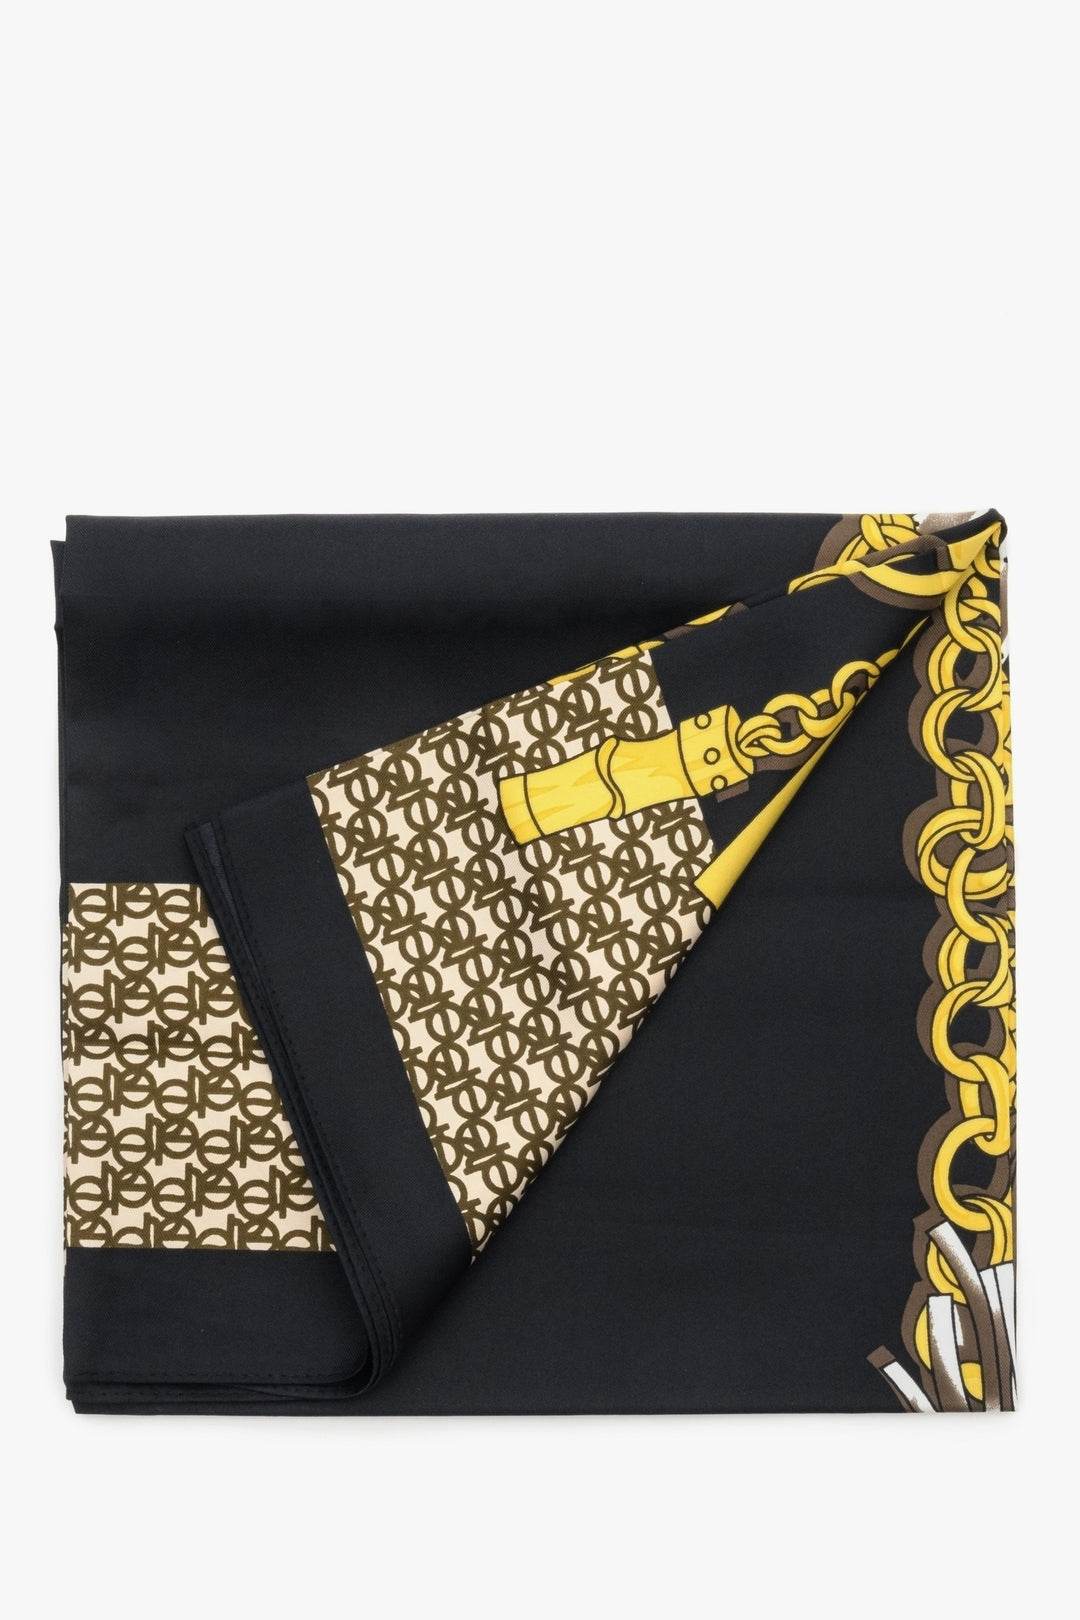 Women's black and gold neckerchief with a pattern by Estro.